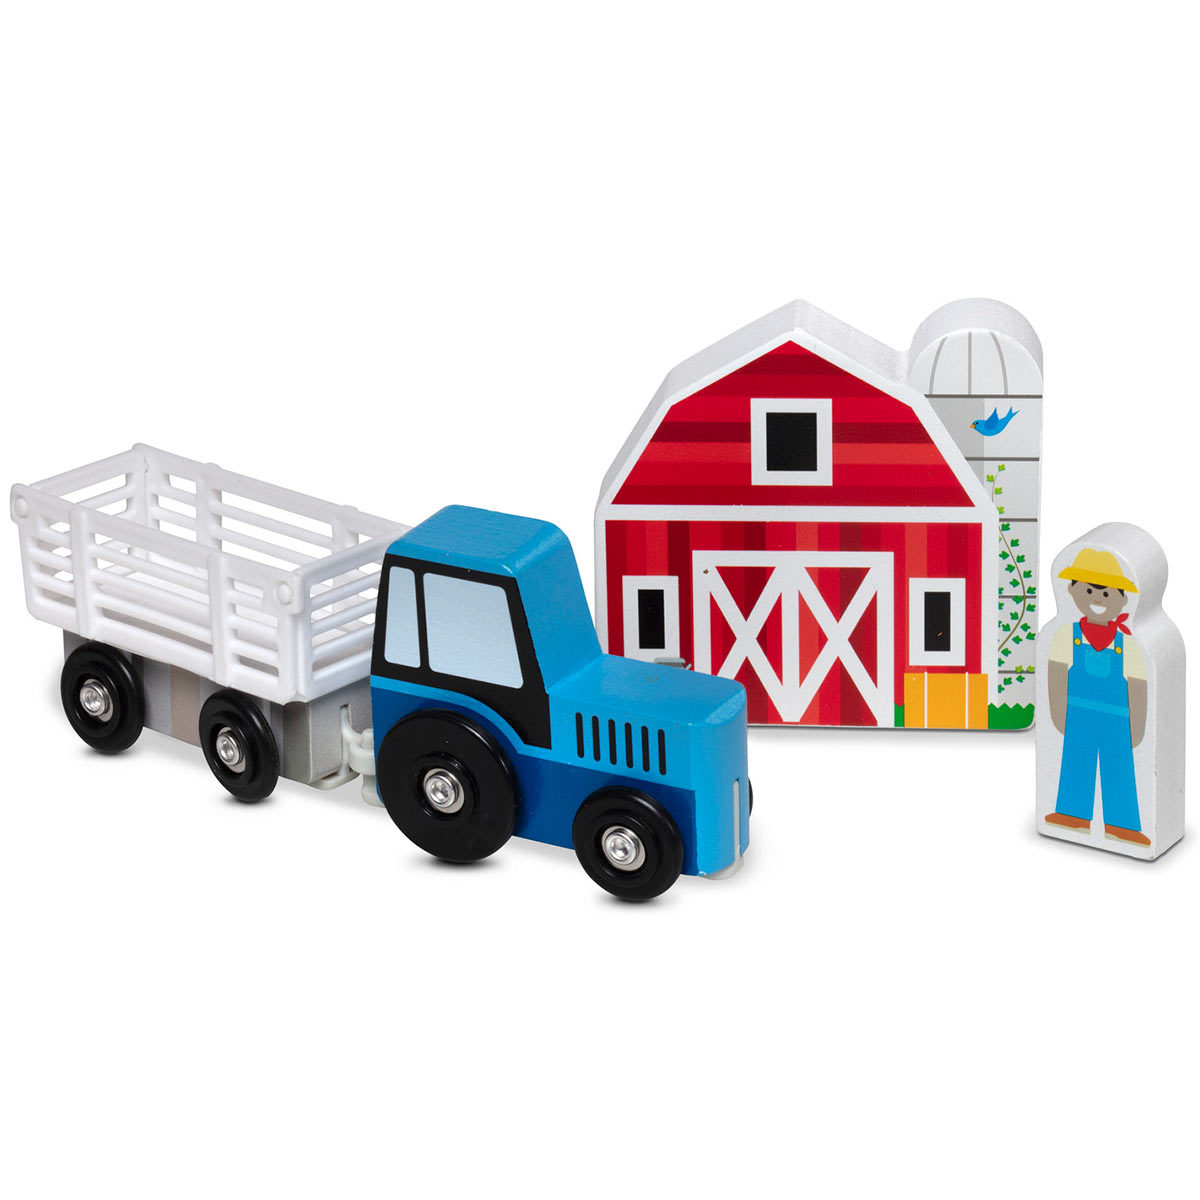 Deluxe wooden town and vehicles play set individual pieces